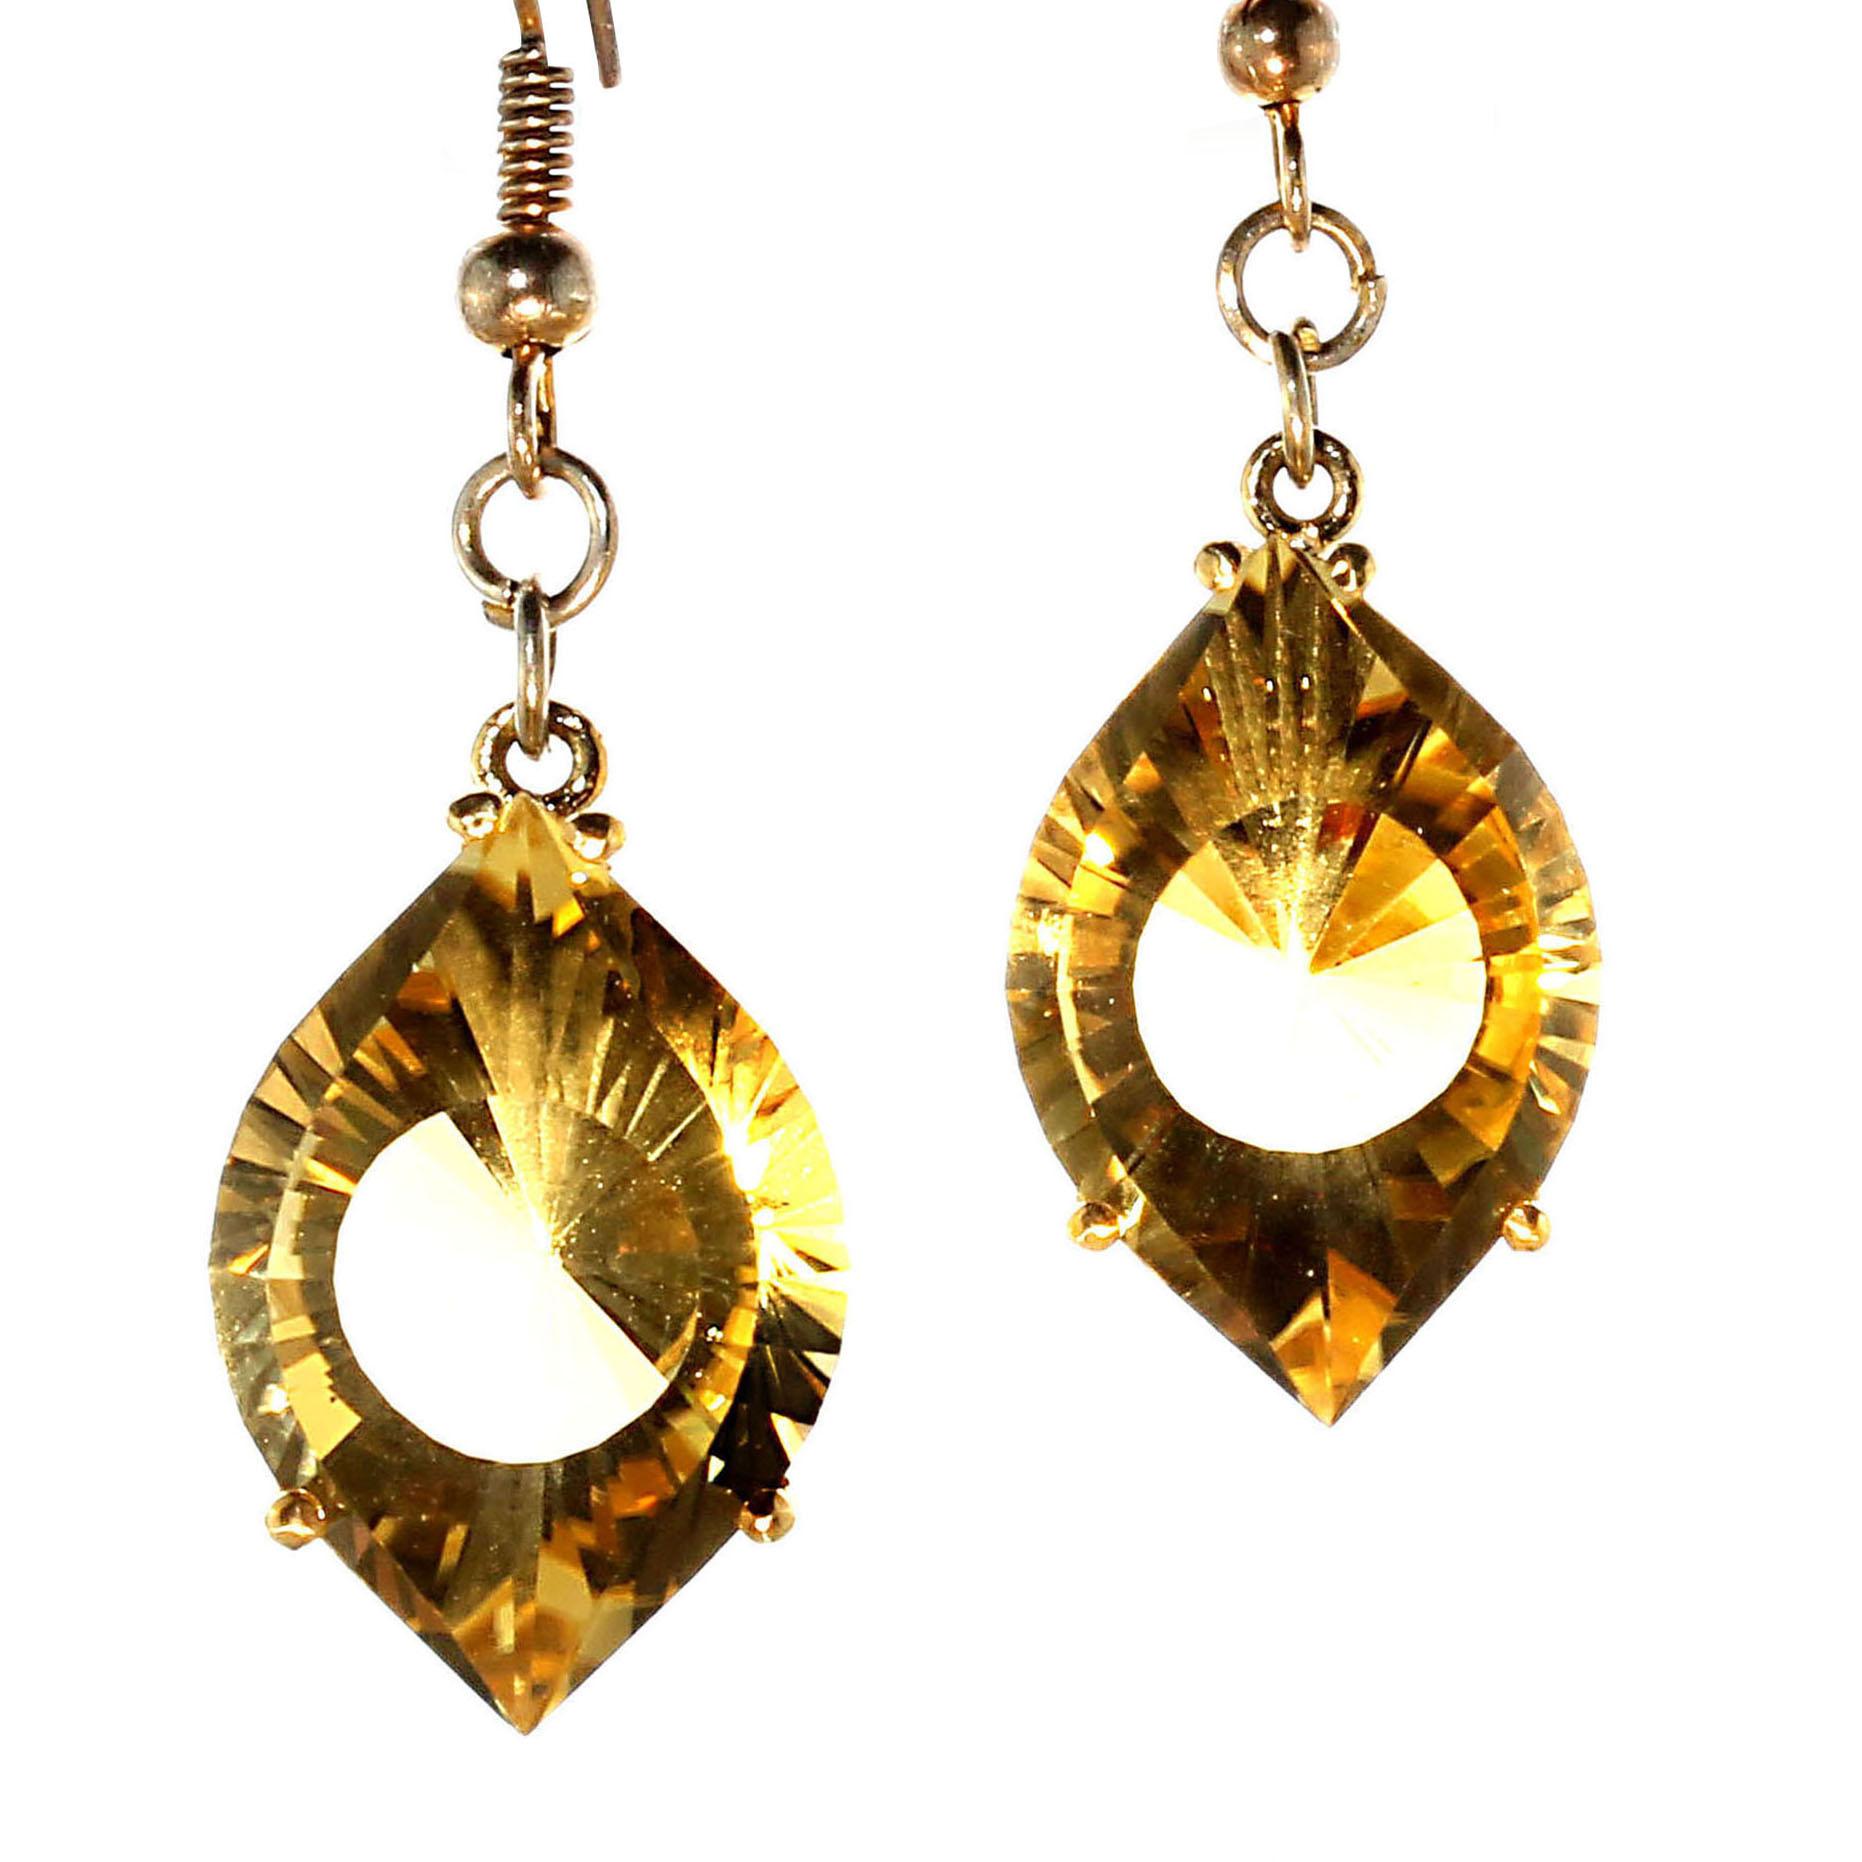 Sparkling fancy cut golden Citrines set in 14K Yellow gold dangling from 14K gold plated french wire earrings.  These amazing Citrines sparkle from every angle as they dance from your ears.  The gorgeous gemstones are 20x13MM.  The entire length of